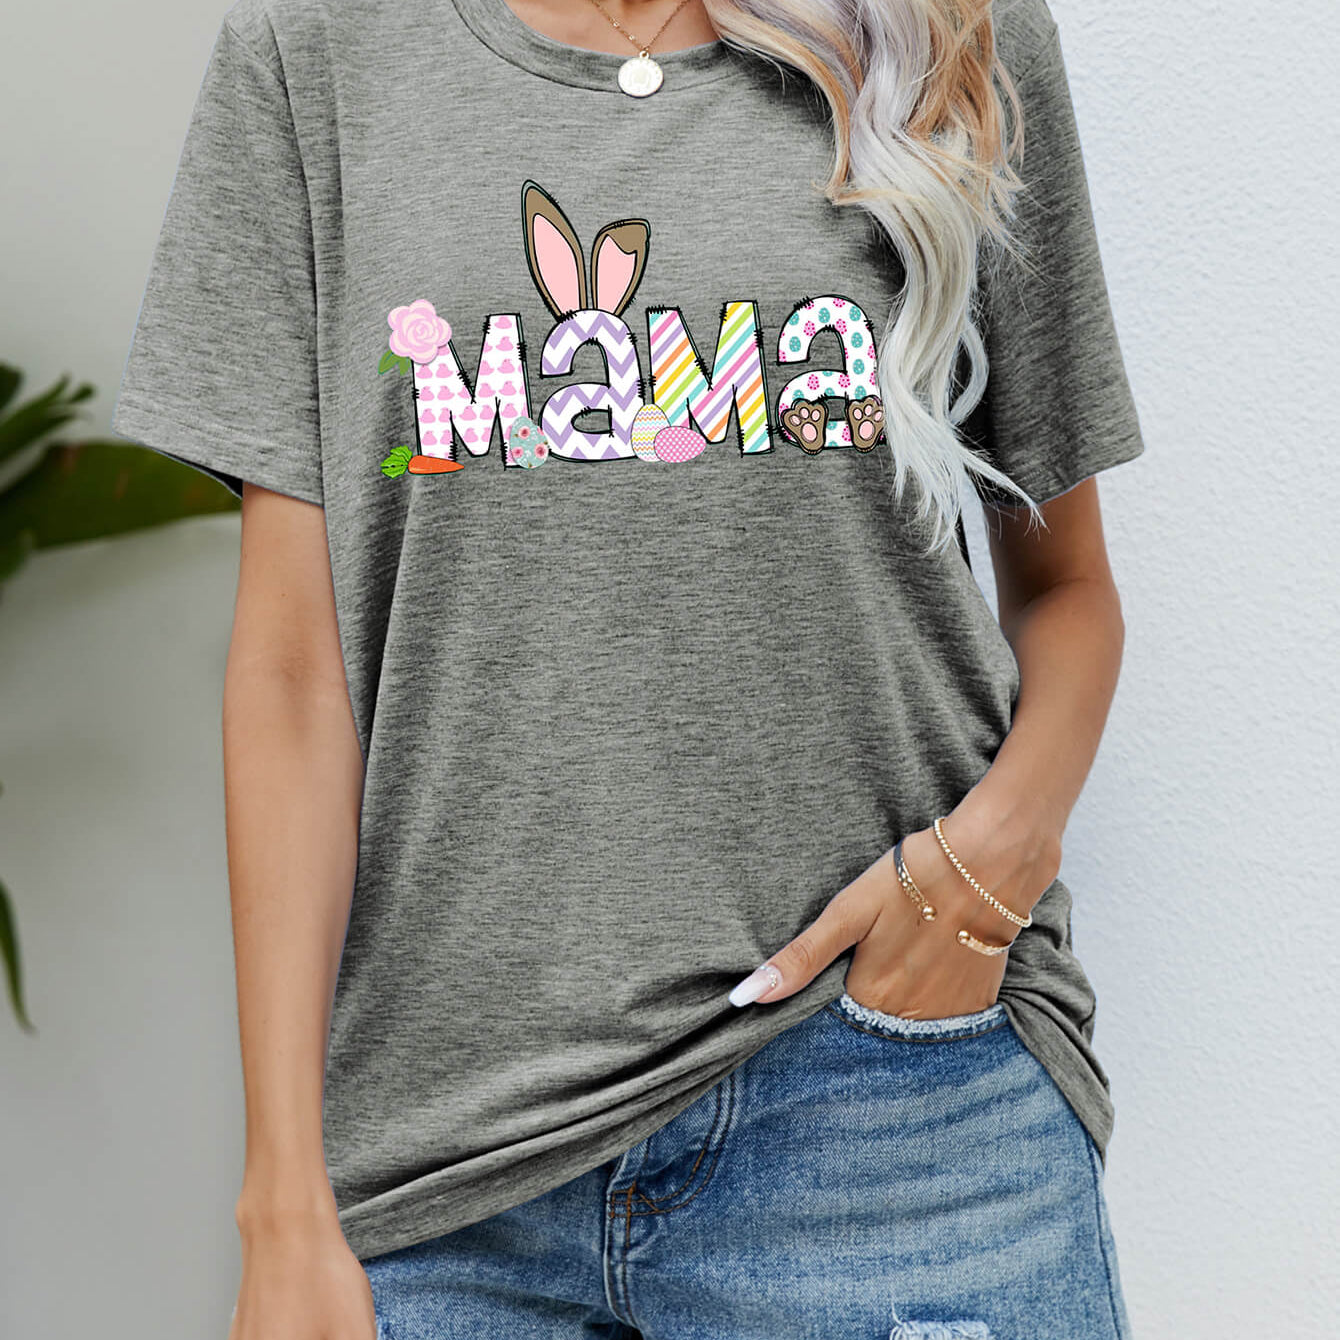 Indulge in the season of love with our Easter MAMA Graphic Round Neck T-Shirt - Express your gratitude to the woman who gave you everything, wrapped in soft comfort and delicate charm. - Guy Christopher